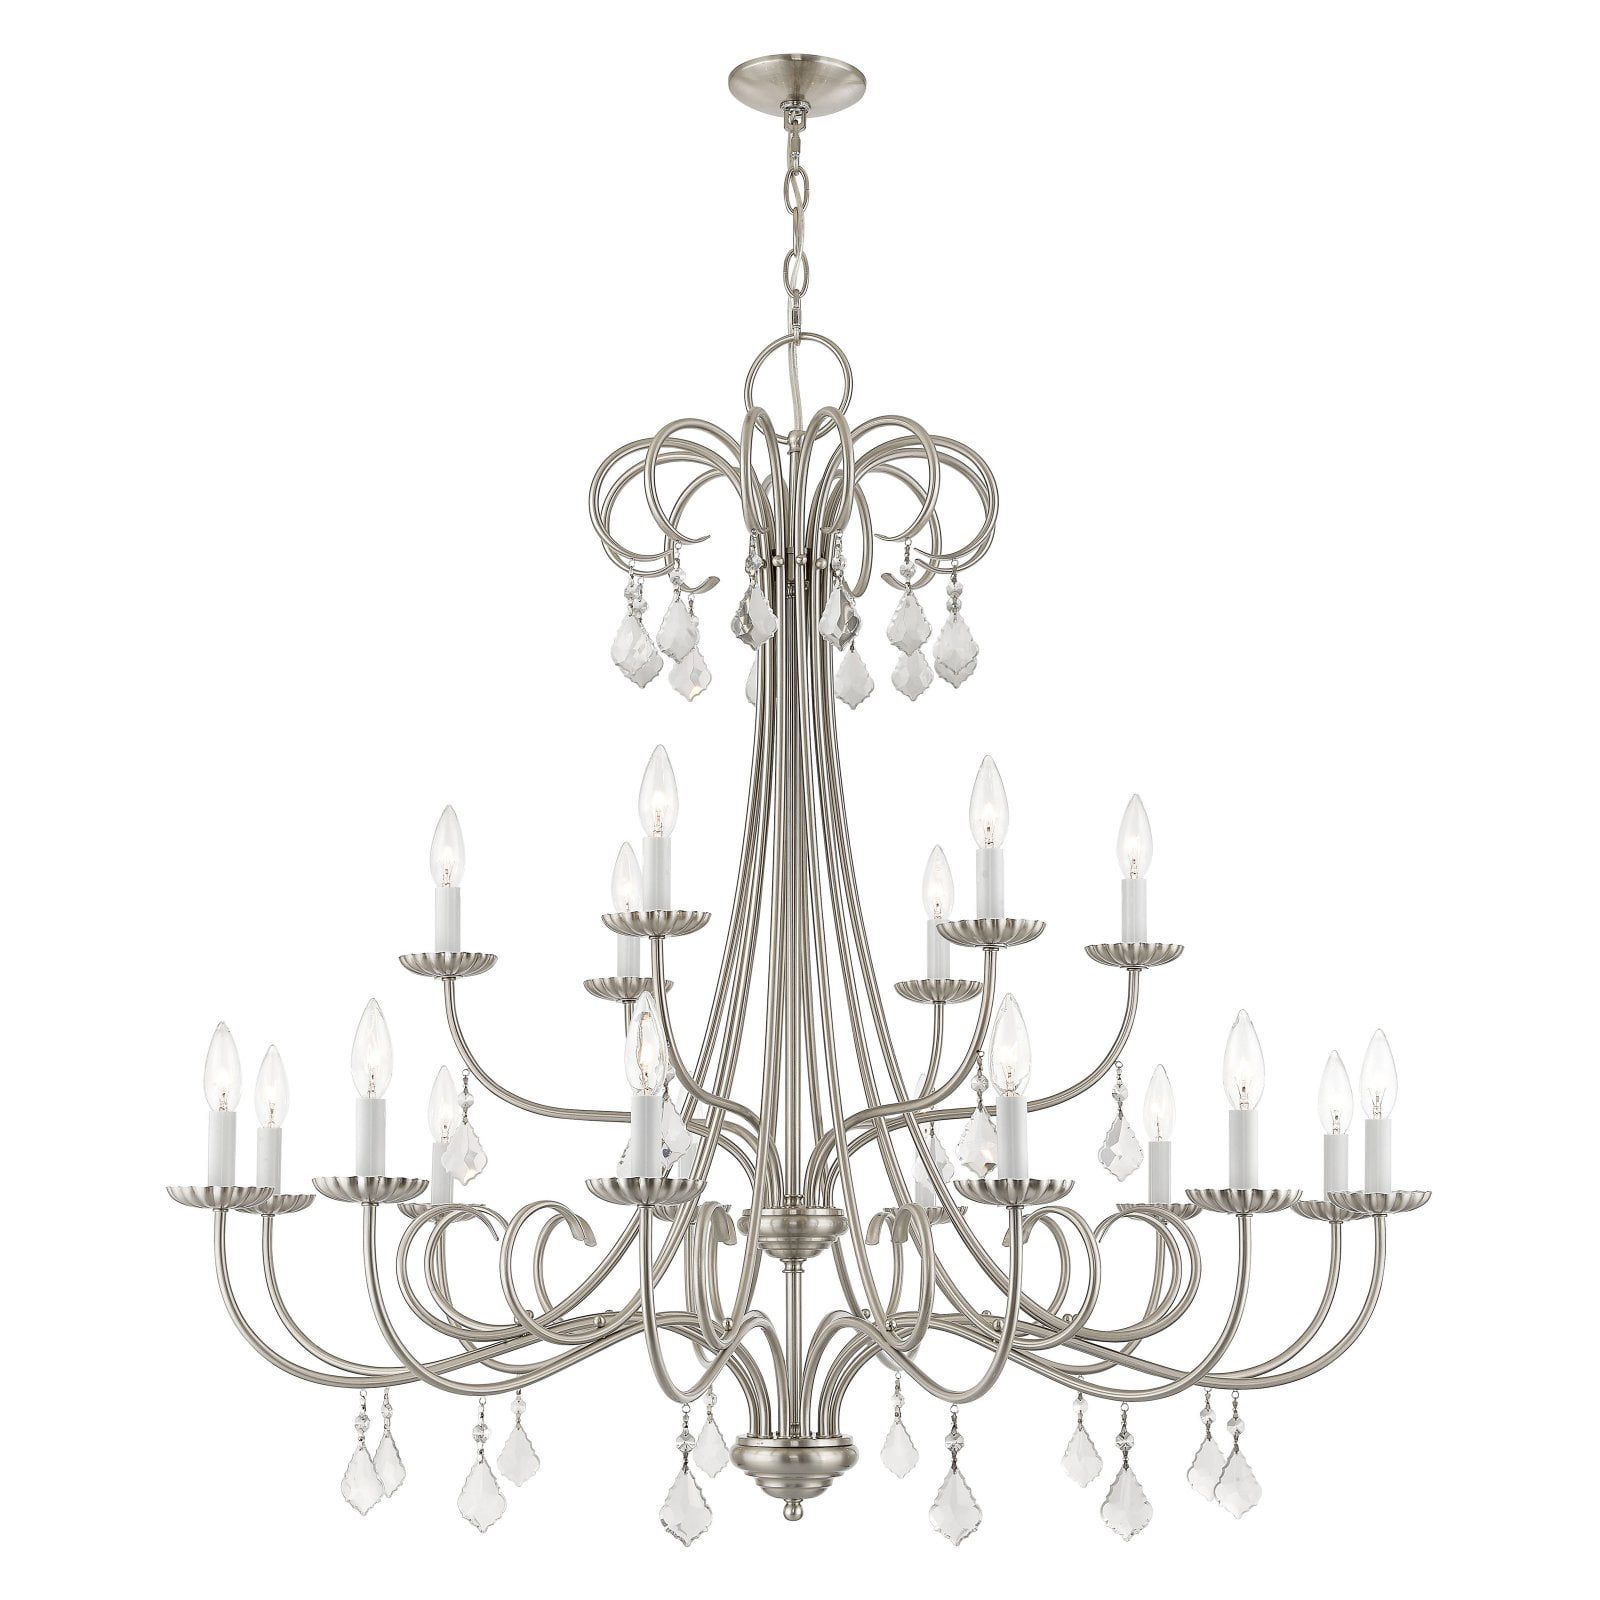 Elegant Brushed Nickel 18-Light Chandelier with Crystal Accents